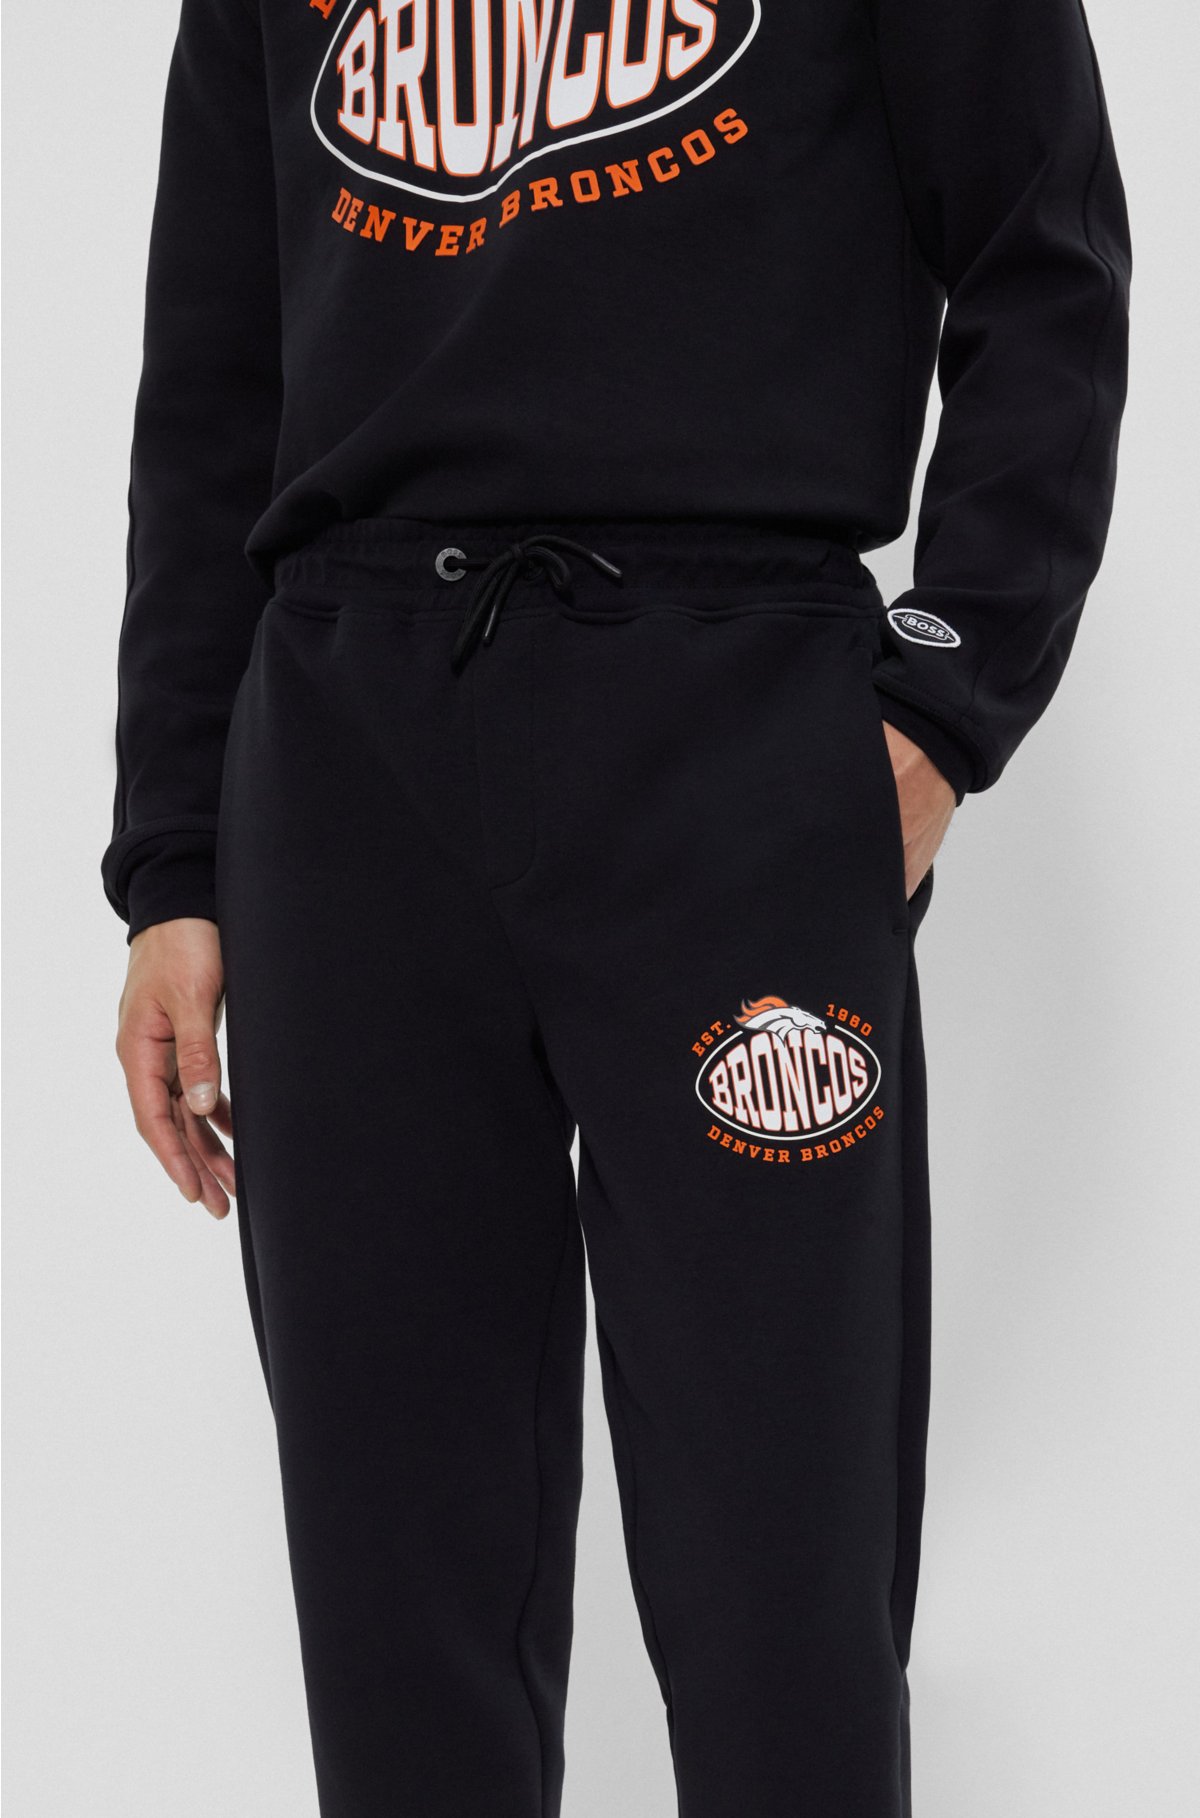 BOSS x NFL cotton-blend tracksuit bottoms with collaborative branding, Broncos